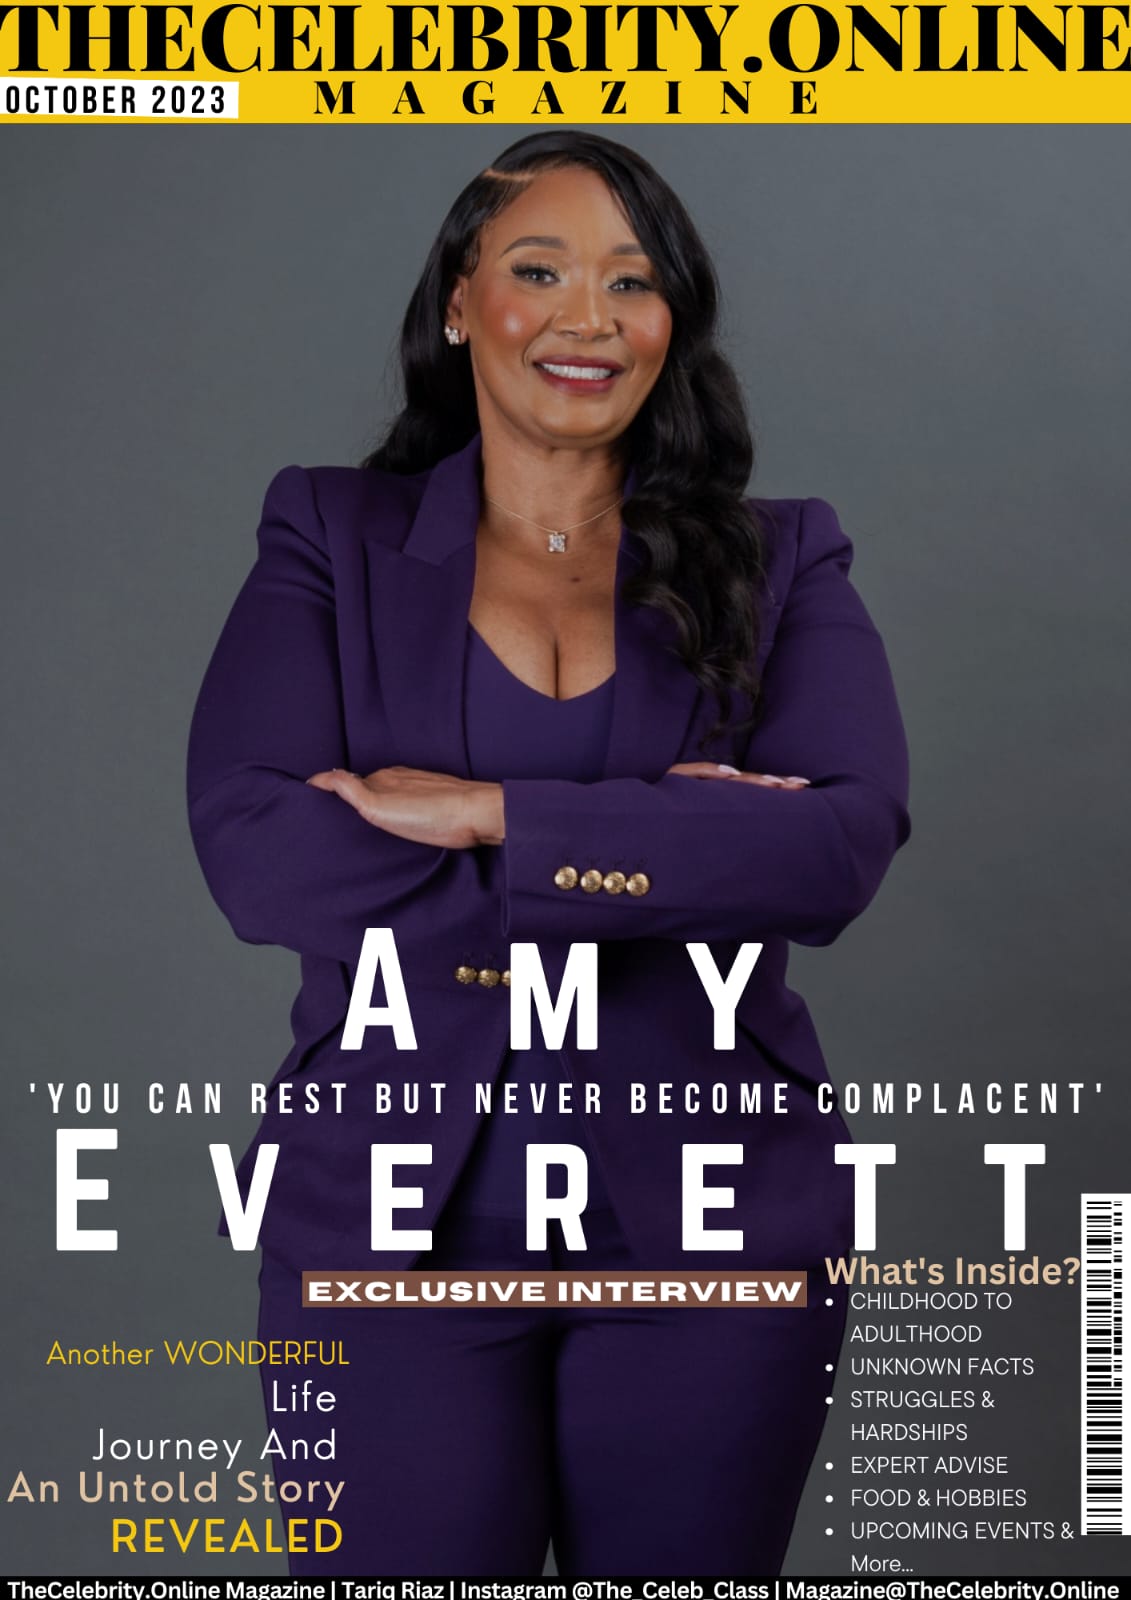 Amy Everett Exclusive Interview – ‘You Can Rest But Never Become Complacent’